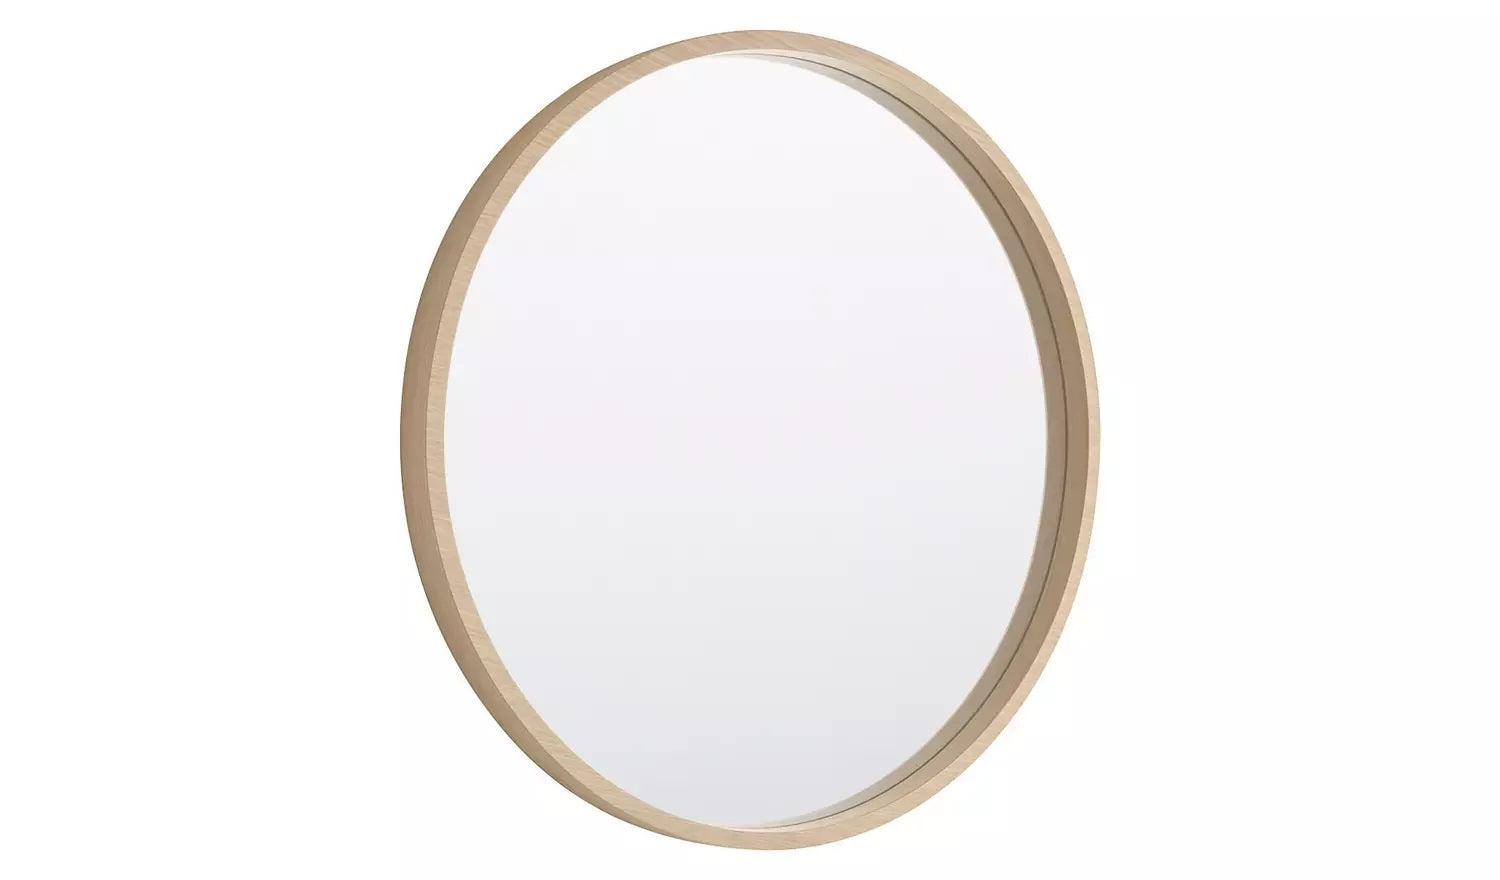 Habitat Ariano Maple Veneer Round Wall Mirror – GED Outlet